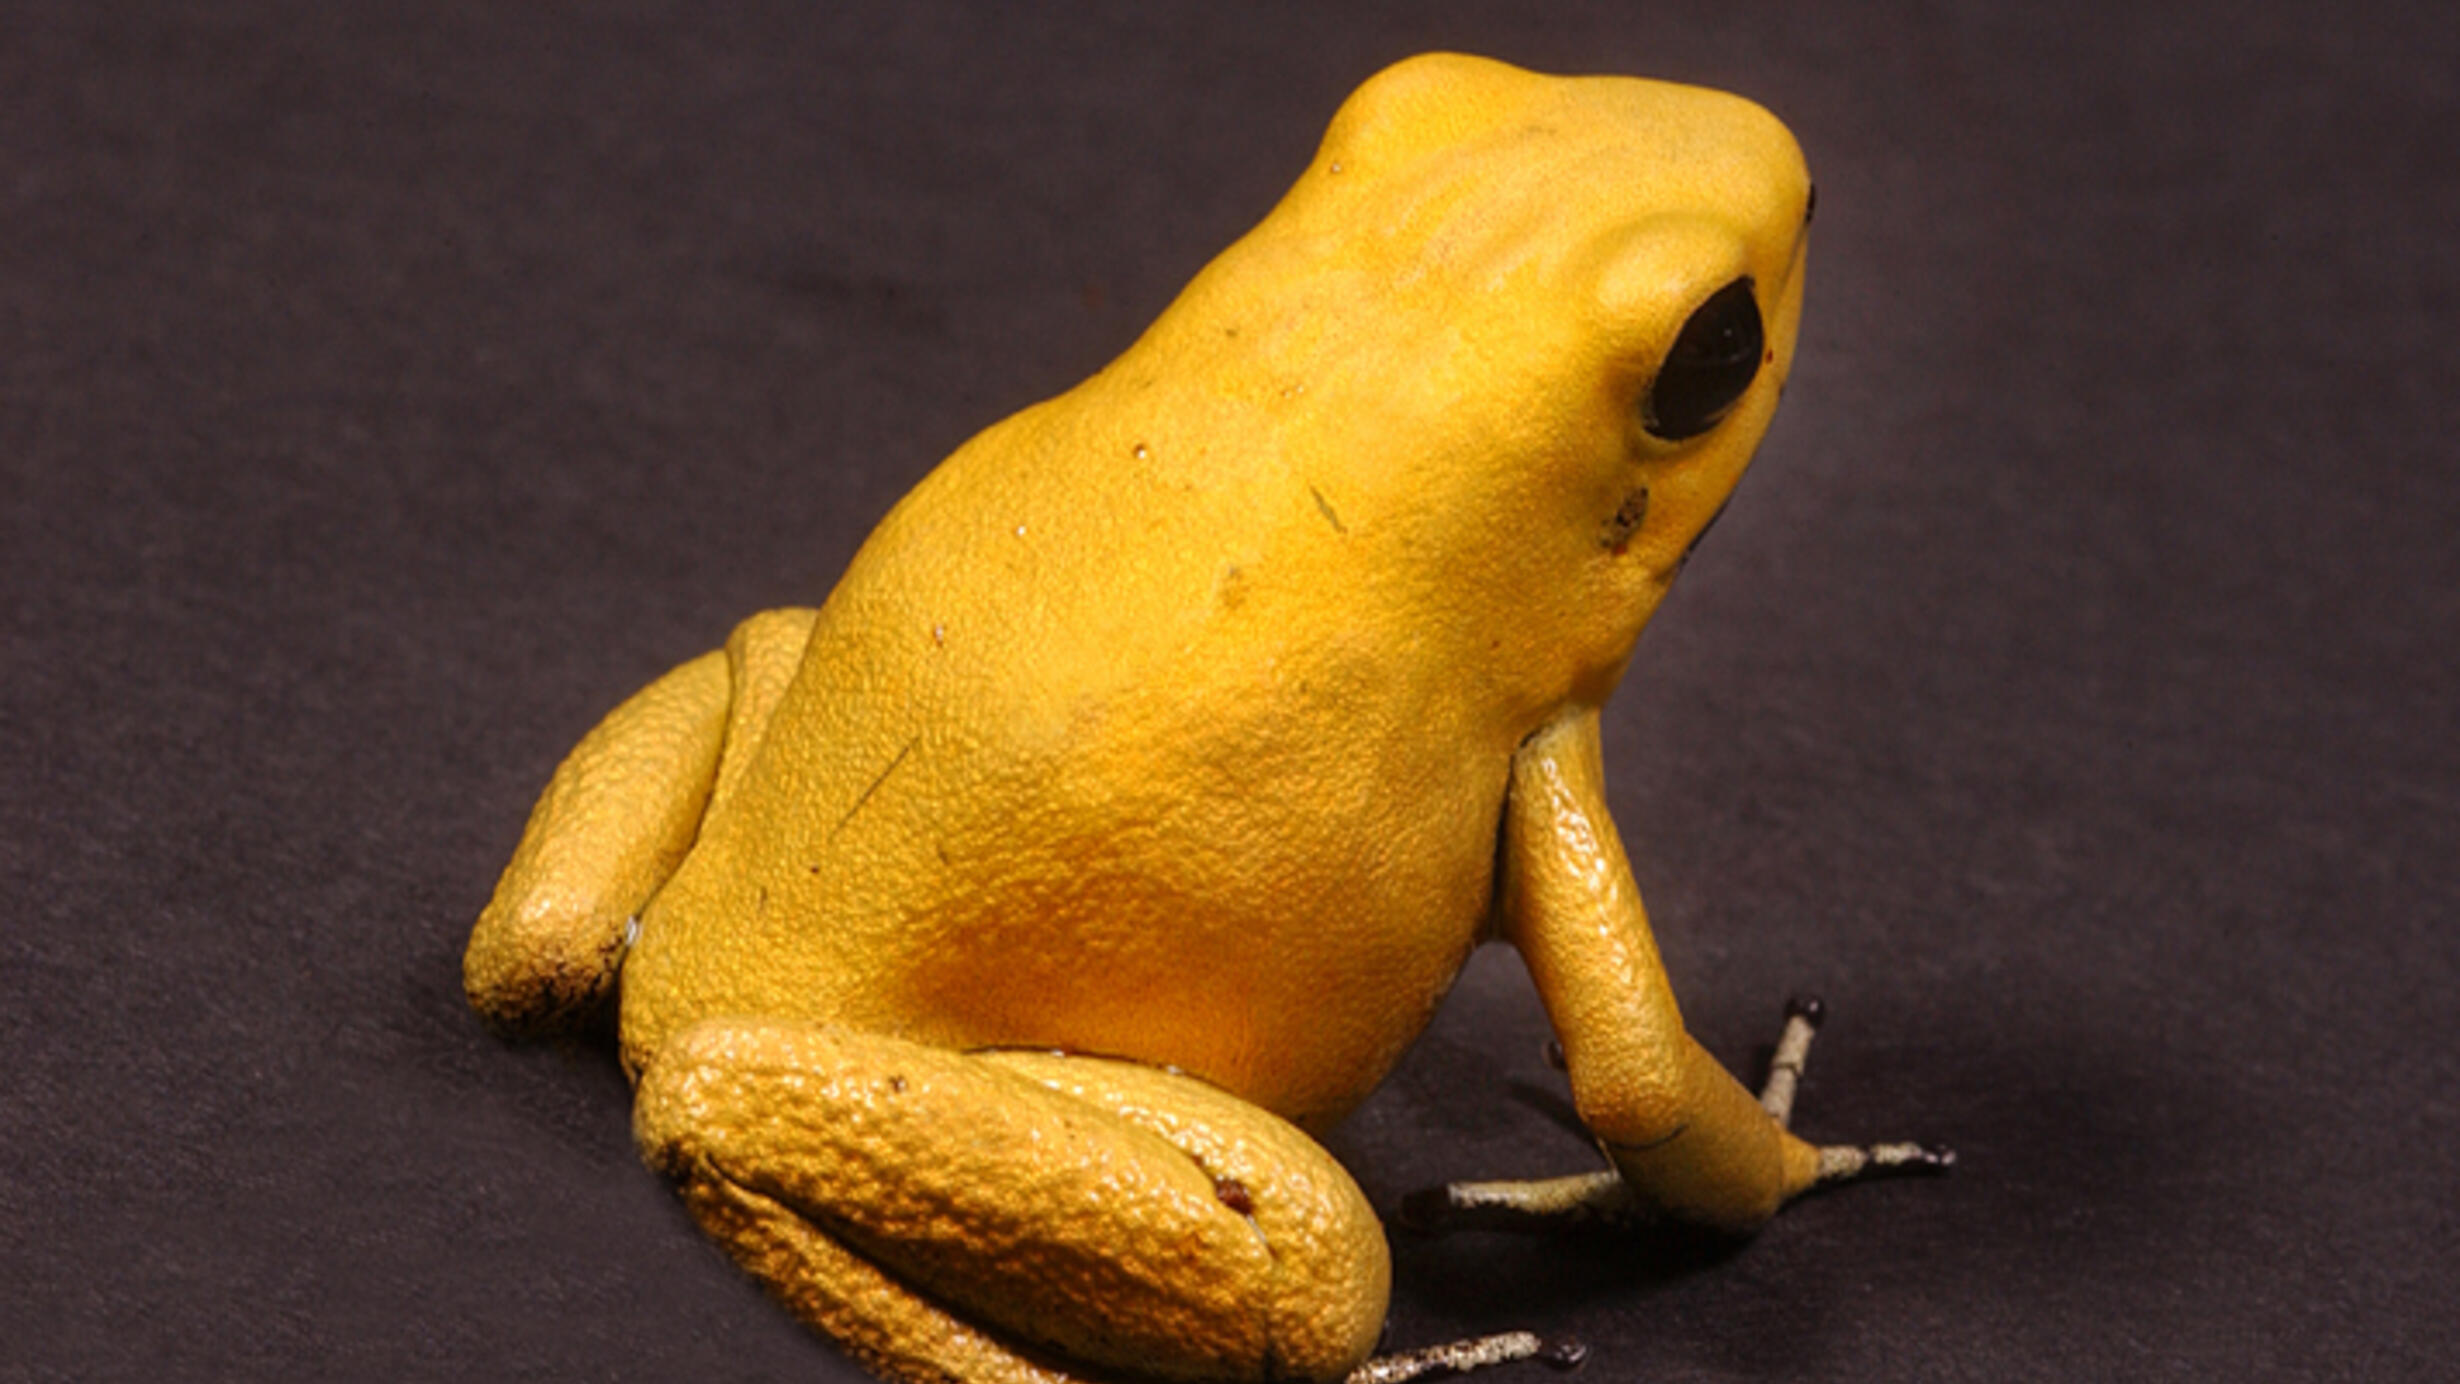 A bright yellow frog.